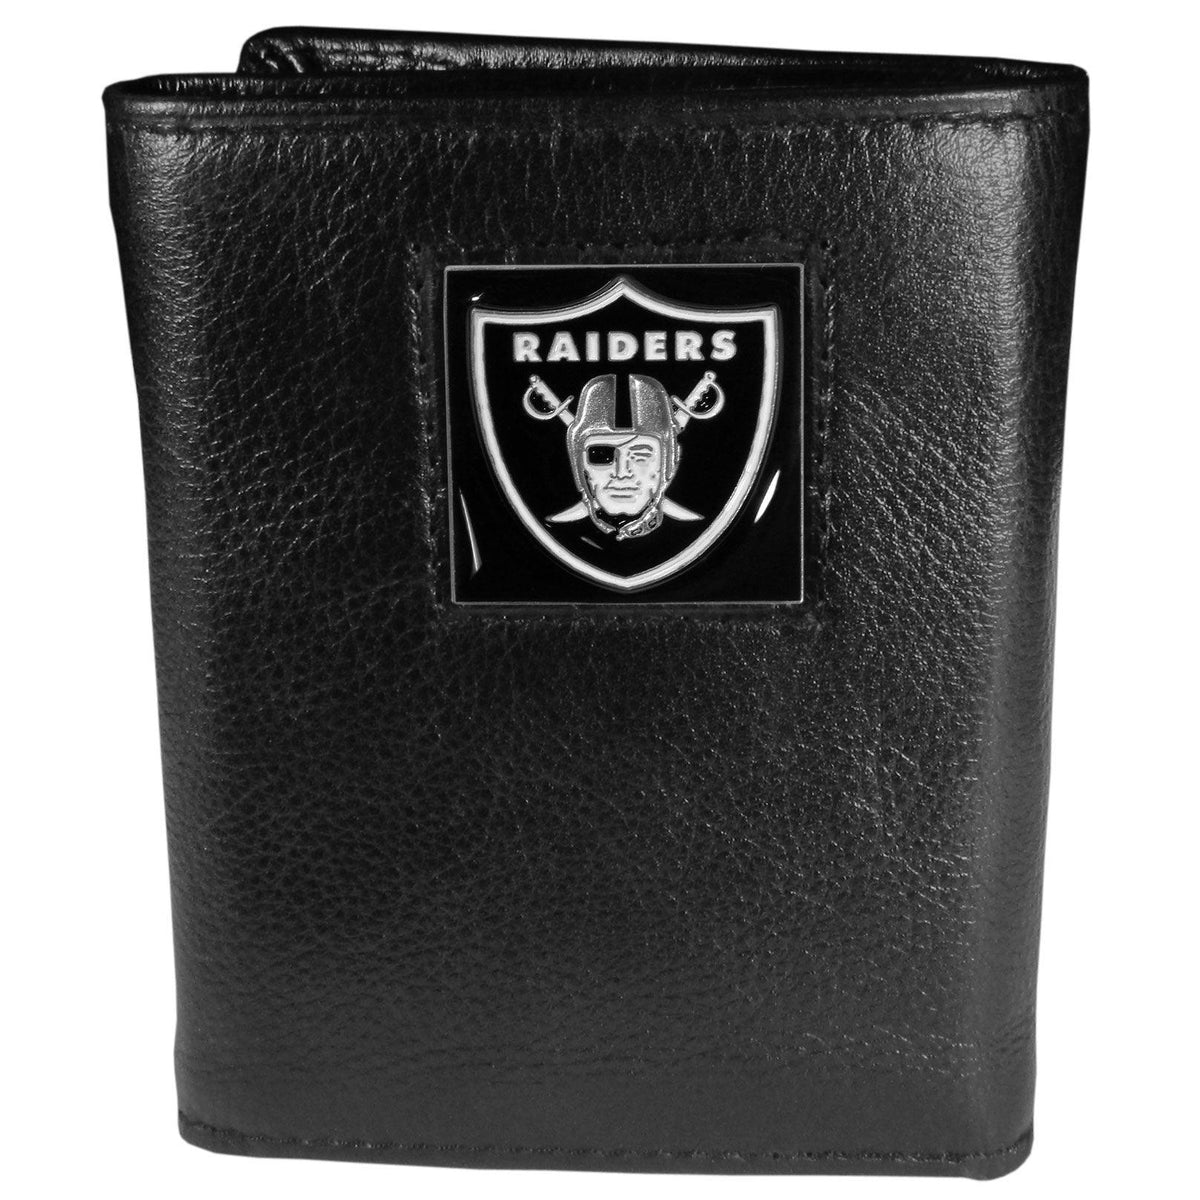 Las Vegas Raiders Deluxe Leather Tri-fold Wallet Packaged in Gift Box - Flyclothing LLC